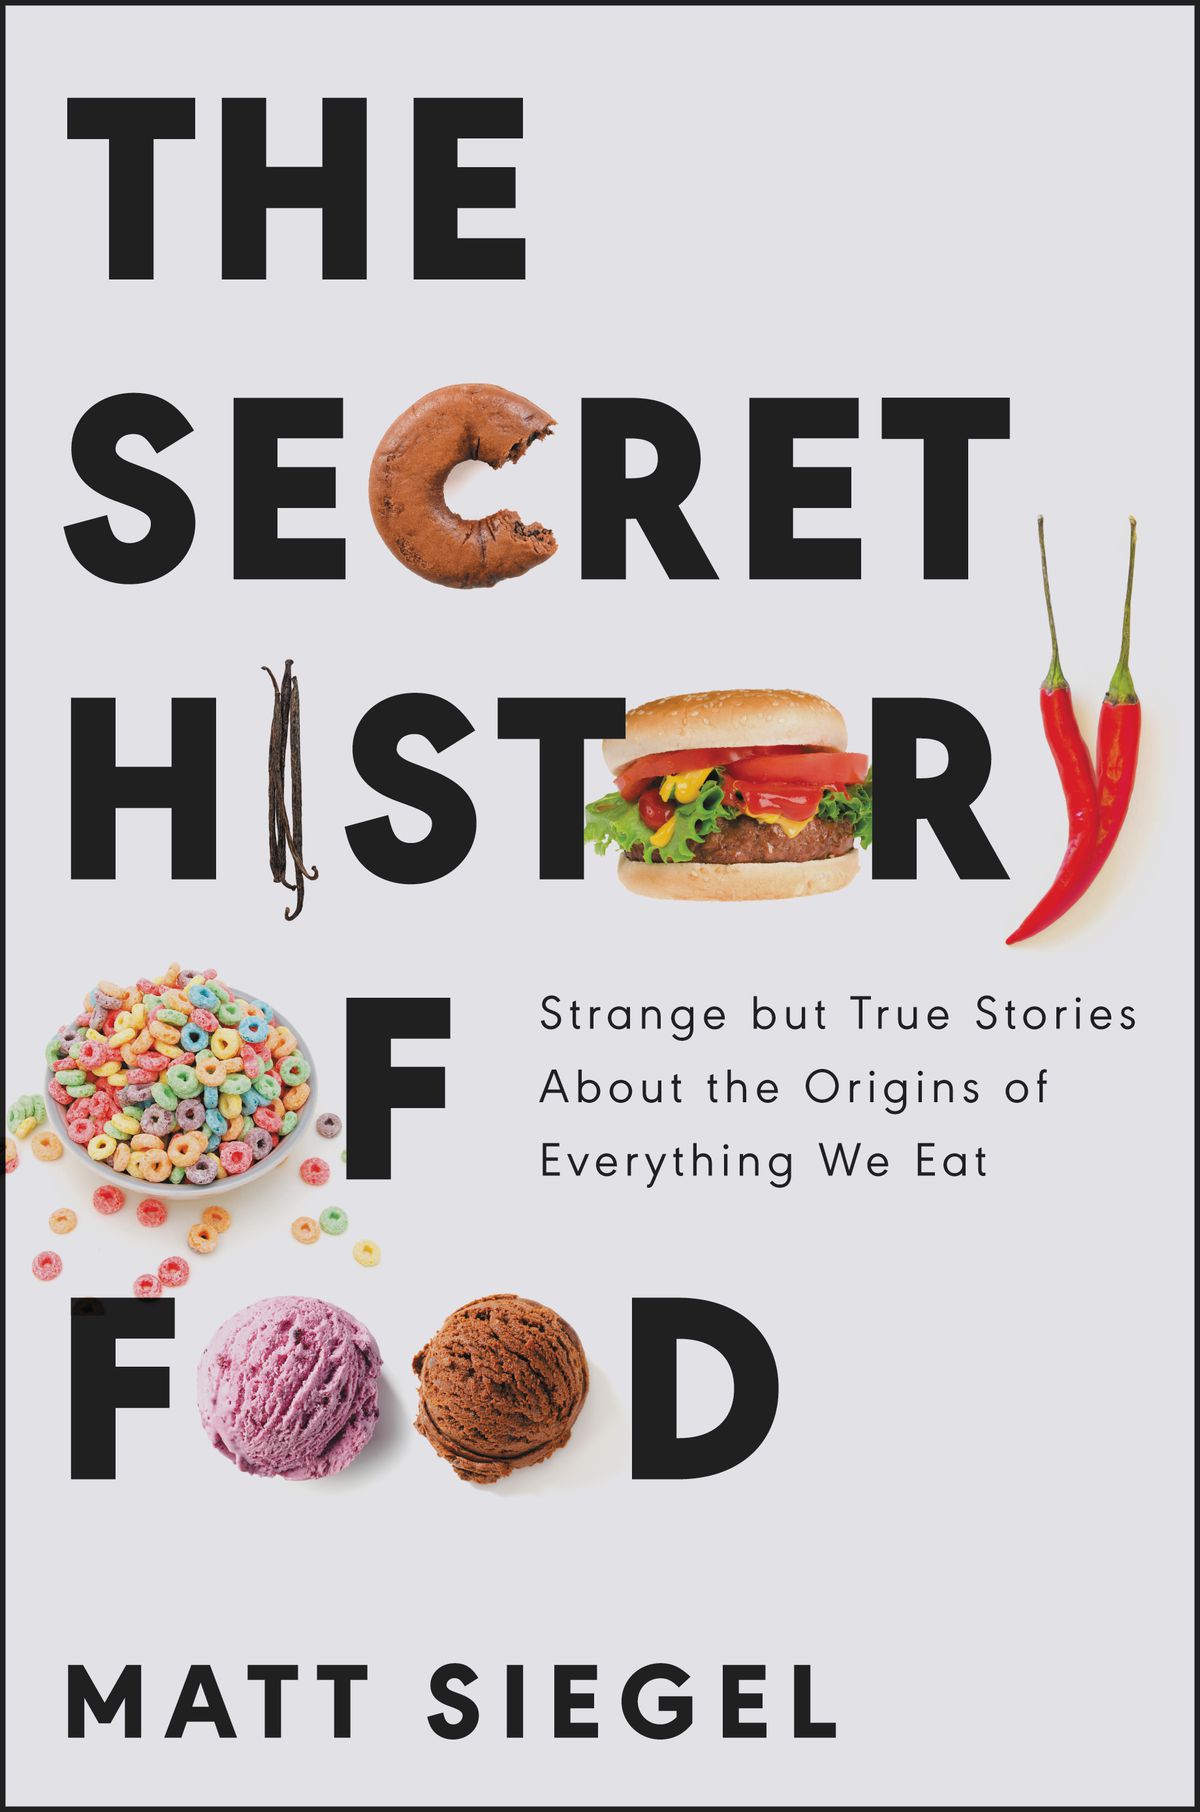 A book cover with the words The Secret History of Food, in which the letter C is replaced by a bagel with a bite out of it, I is swapped for vanilla bean pods, O is a burger, Y is a chile pepper, O in “of” is a bowl of cereal and the Os in “Food” are ice cream scoops